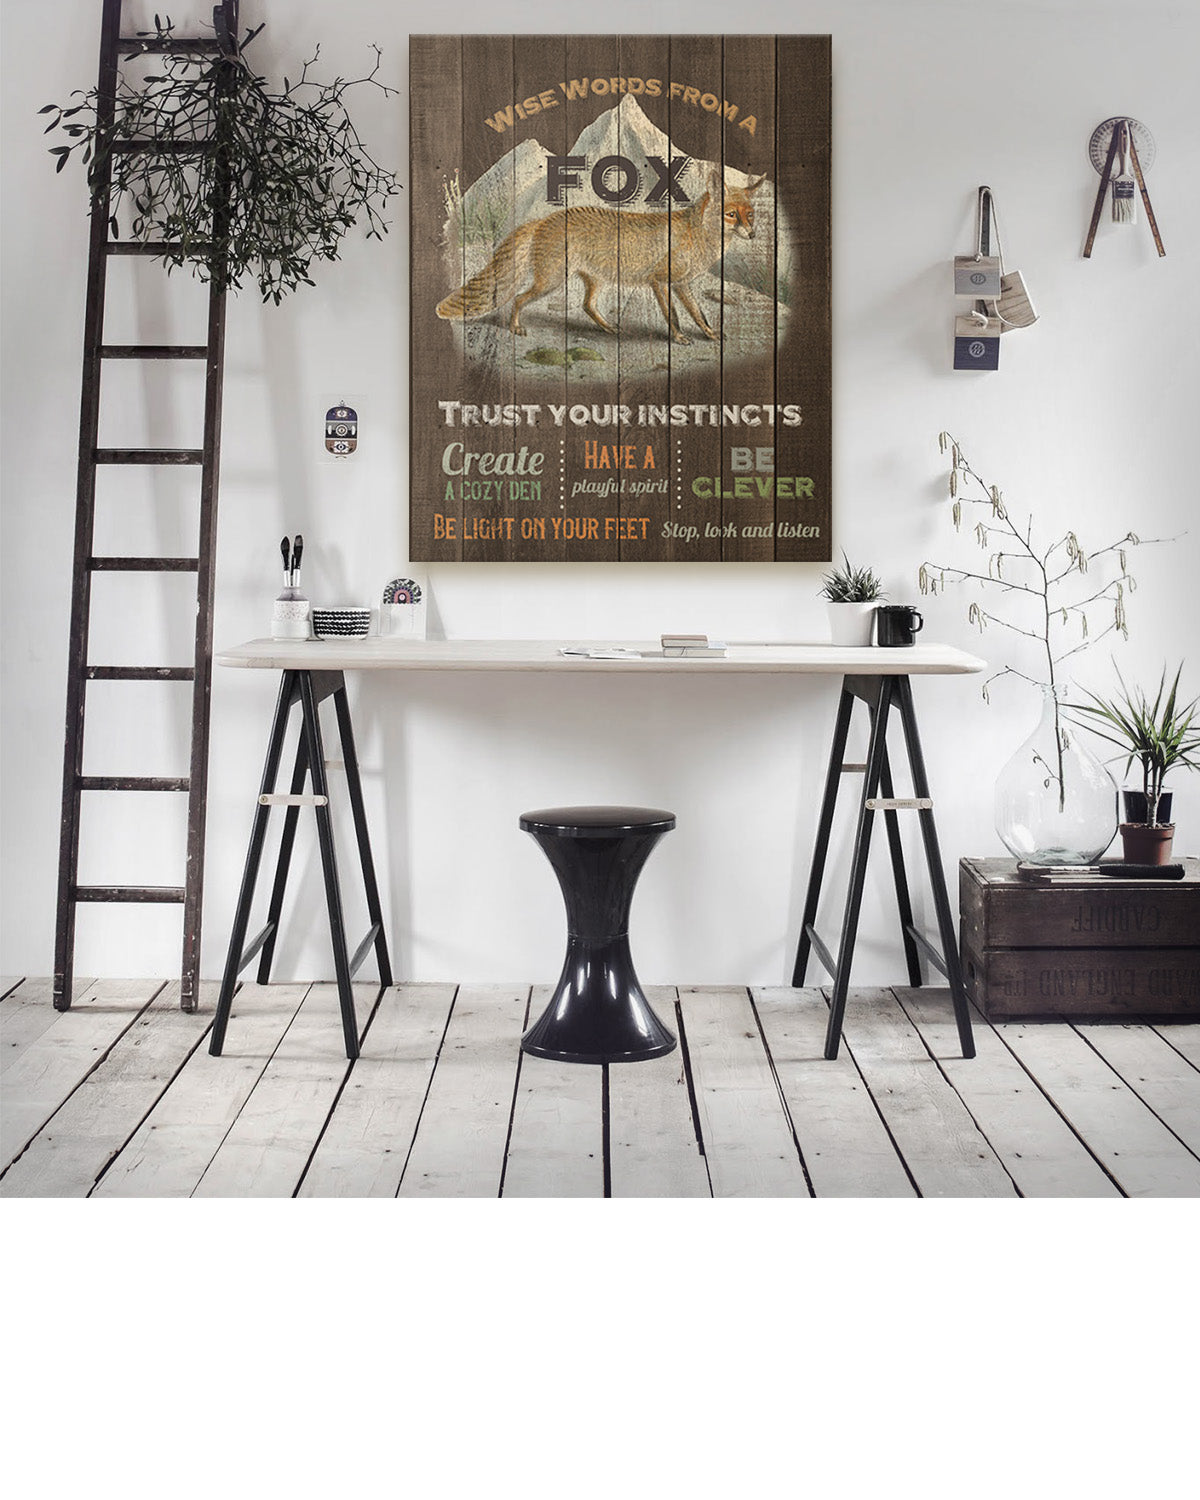 Wise Words From A Fox - Motivational Fox Wall Art Decor Print with a brown background